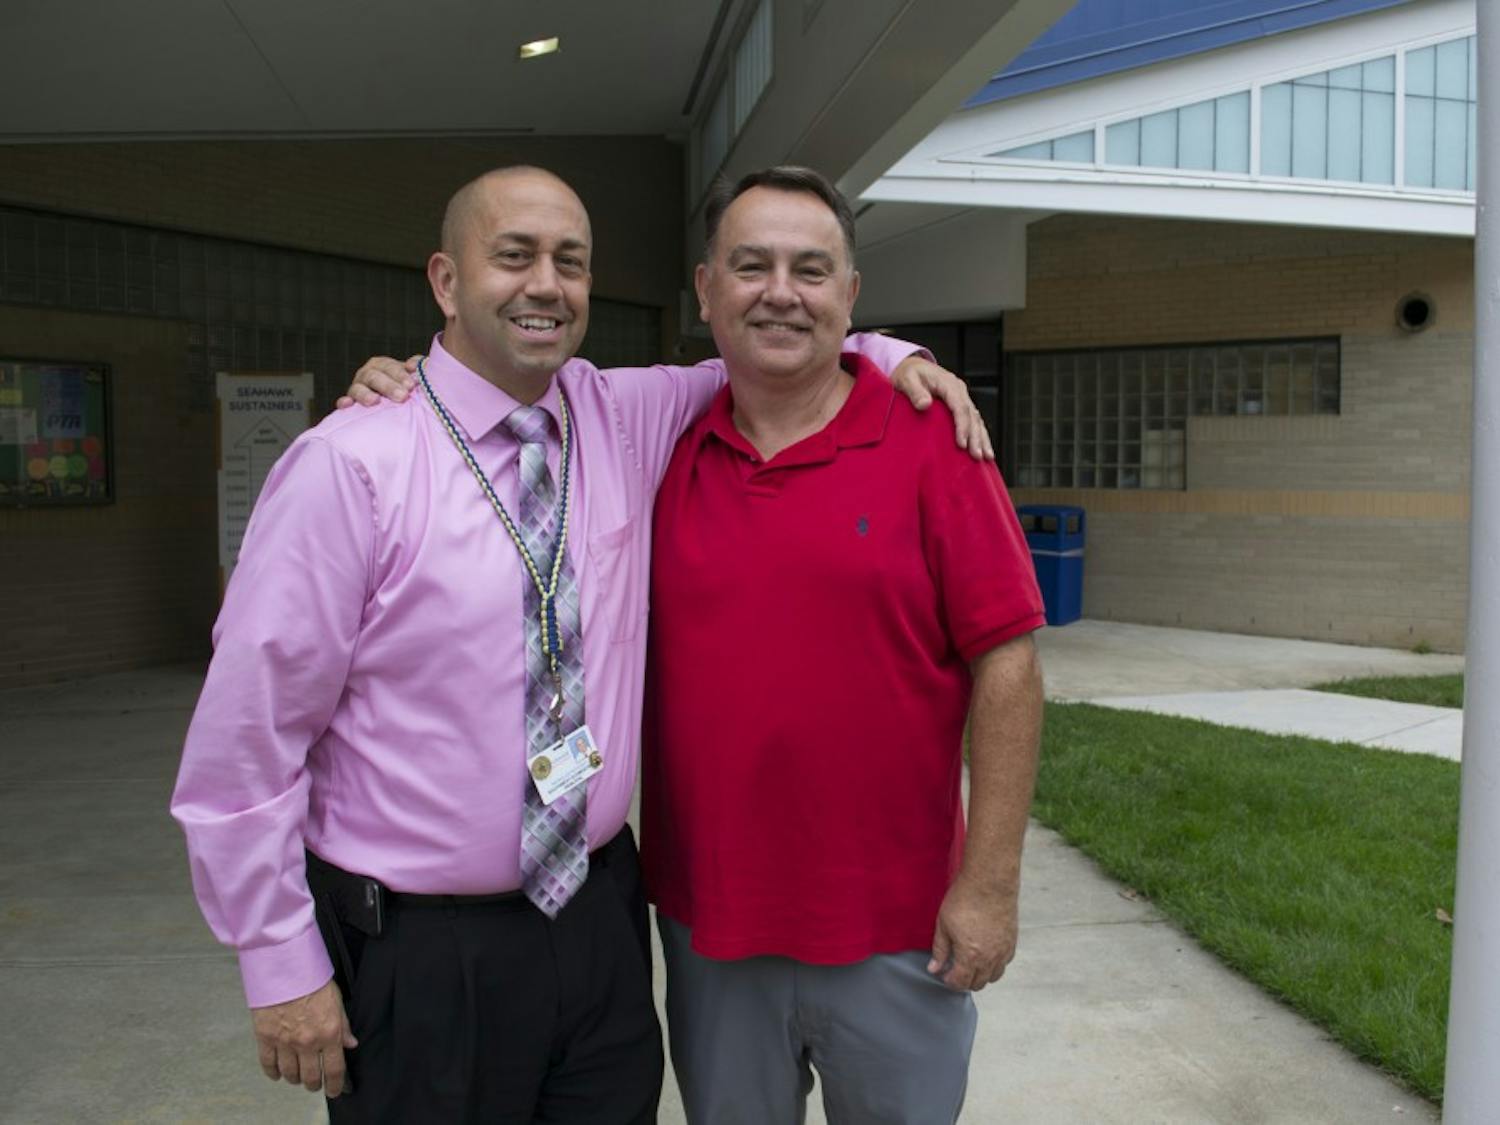 Current Principal of Southwest Elementary, Nick Rotosky (left), poses with mentor and former Principal David Sneed (right) at Southwest Elementary in Durham, NC on Monday, Sept. 24.